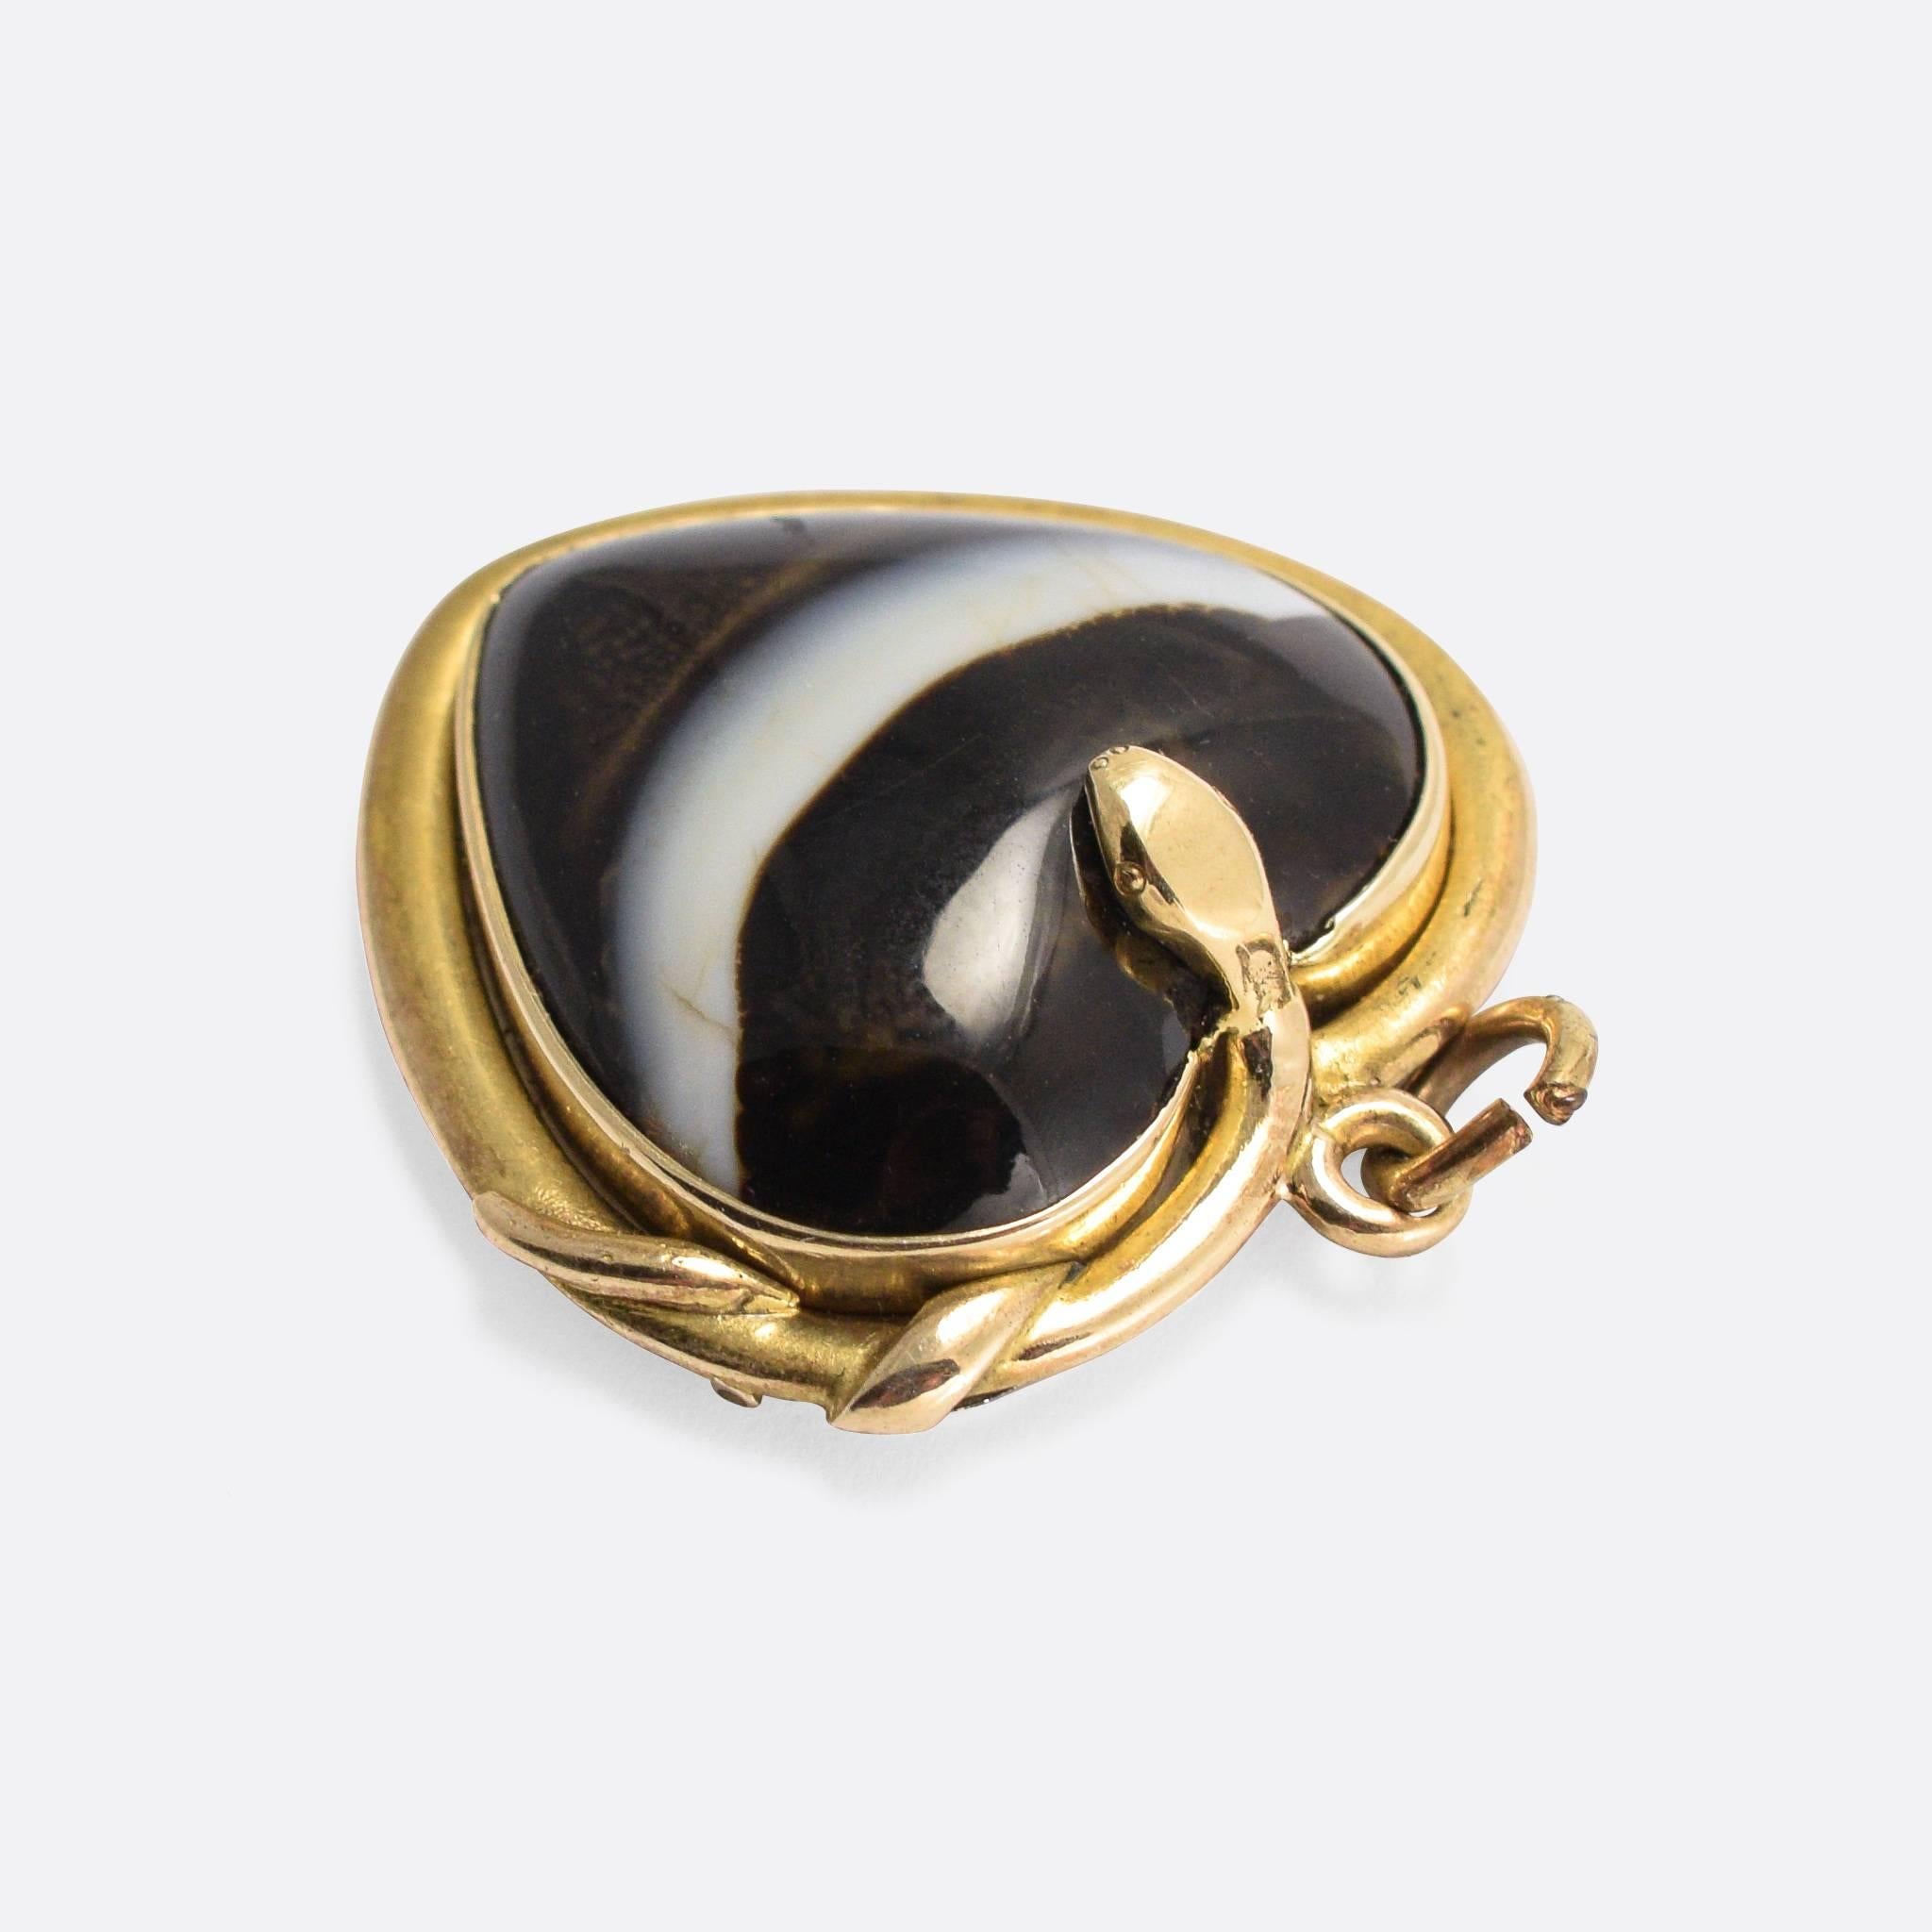 A cool antique heart pendant, set with a heart-shaped banded agate cabochon that rests within the coils of a golden snake... The pendant is a good size - a little over an inch wide - and the detailing to the snake's face is excellent. Modelled in 15